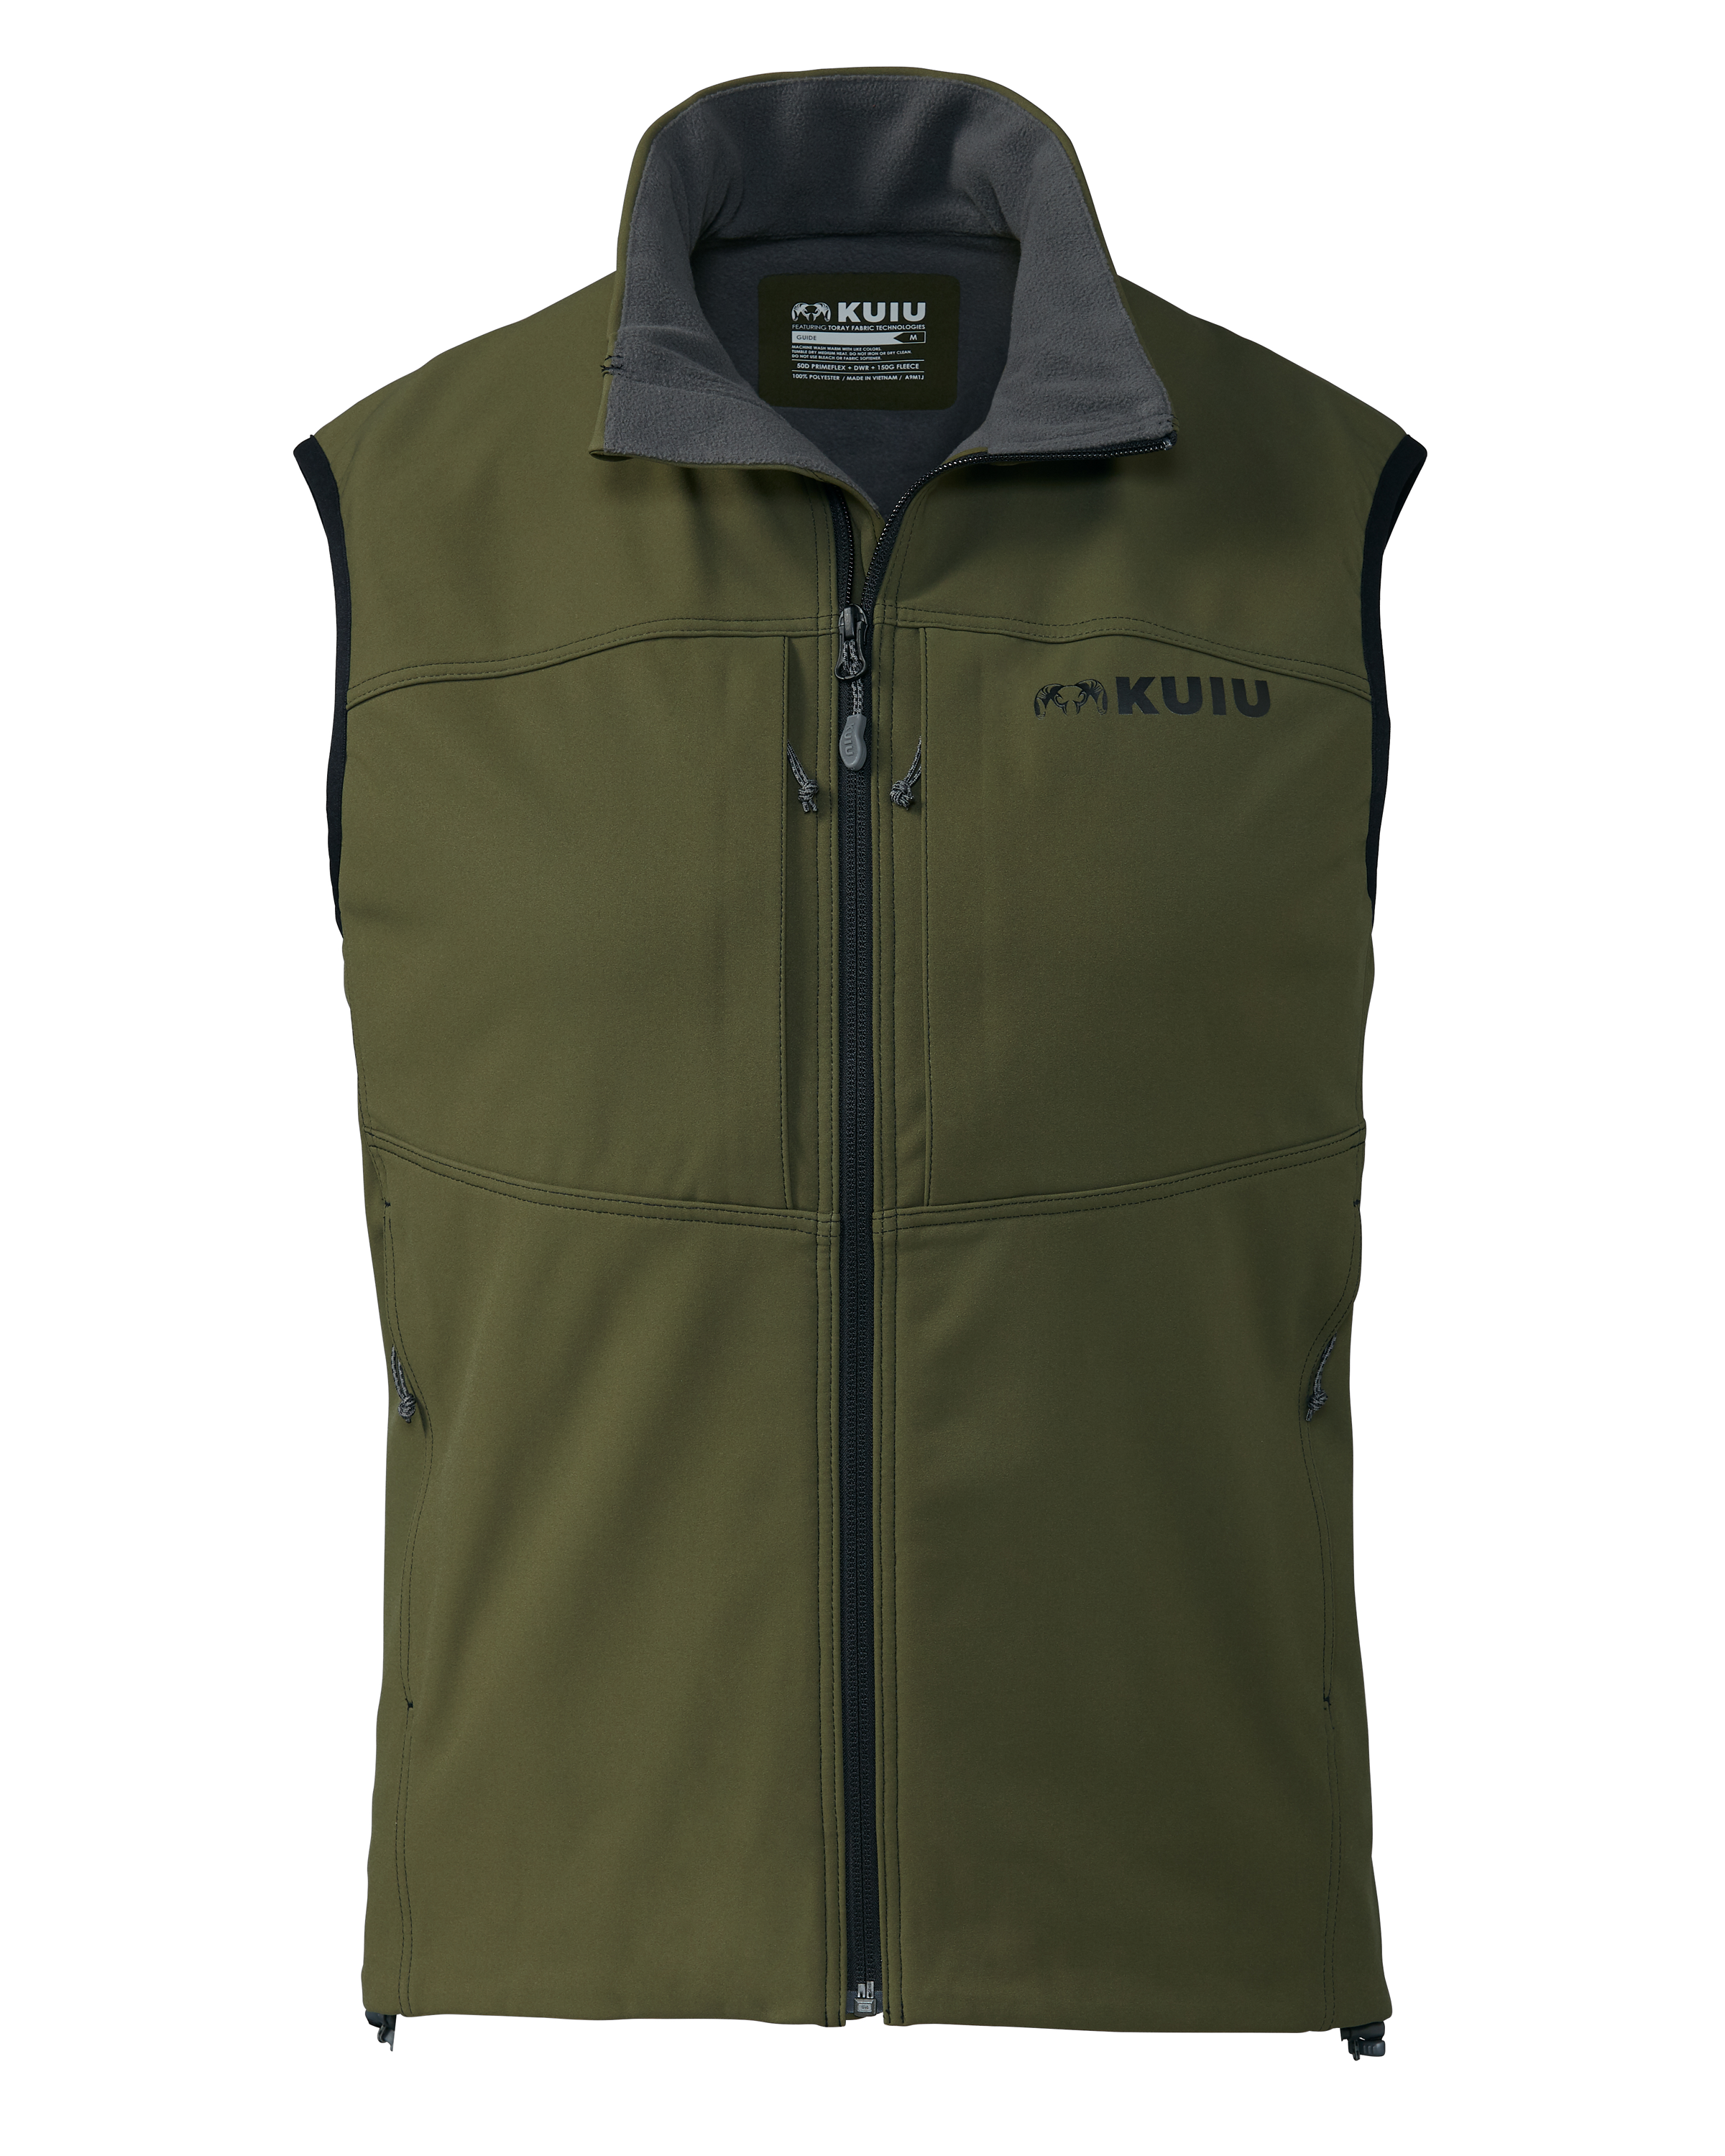 KUIU Guide DCS Hunting Vest in Olive | Large